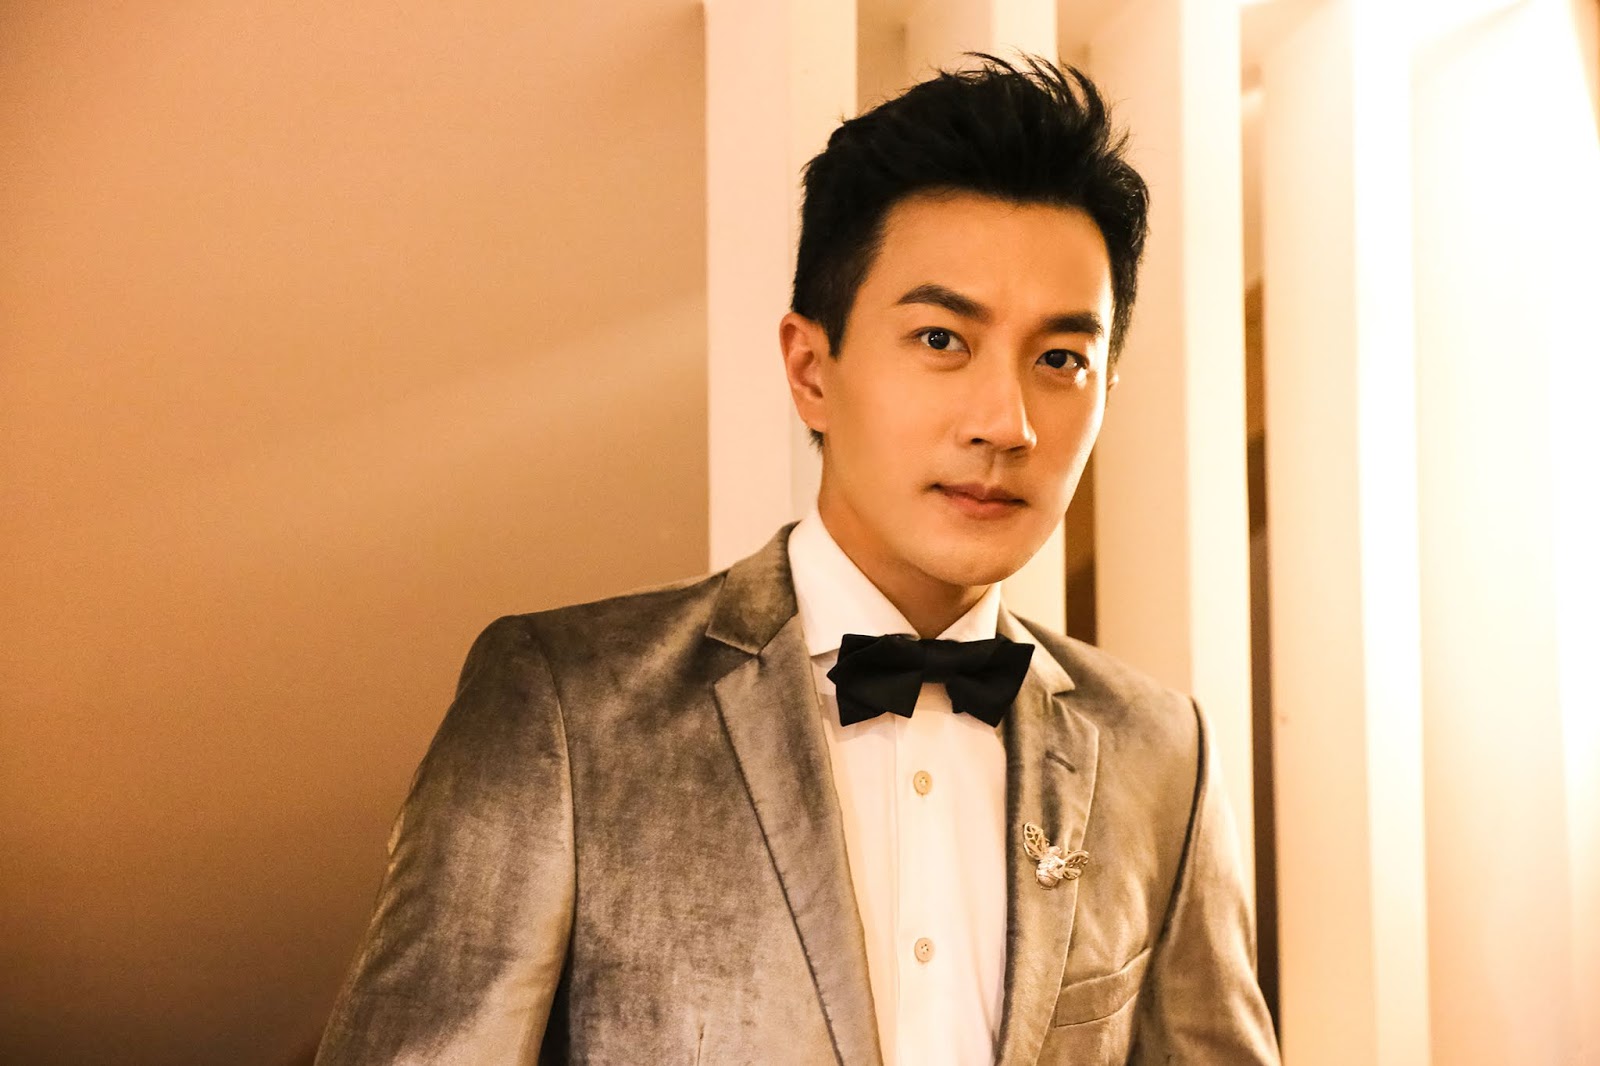 Who is Hawick Lau dating?